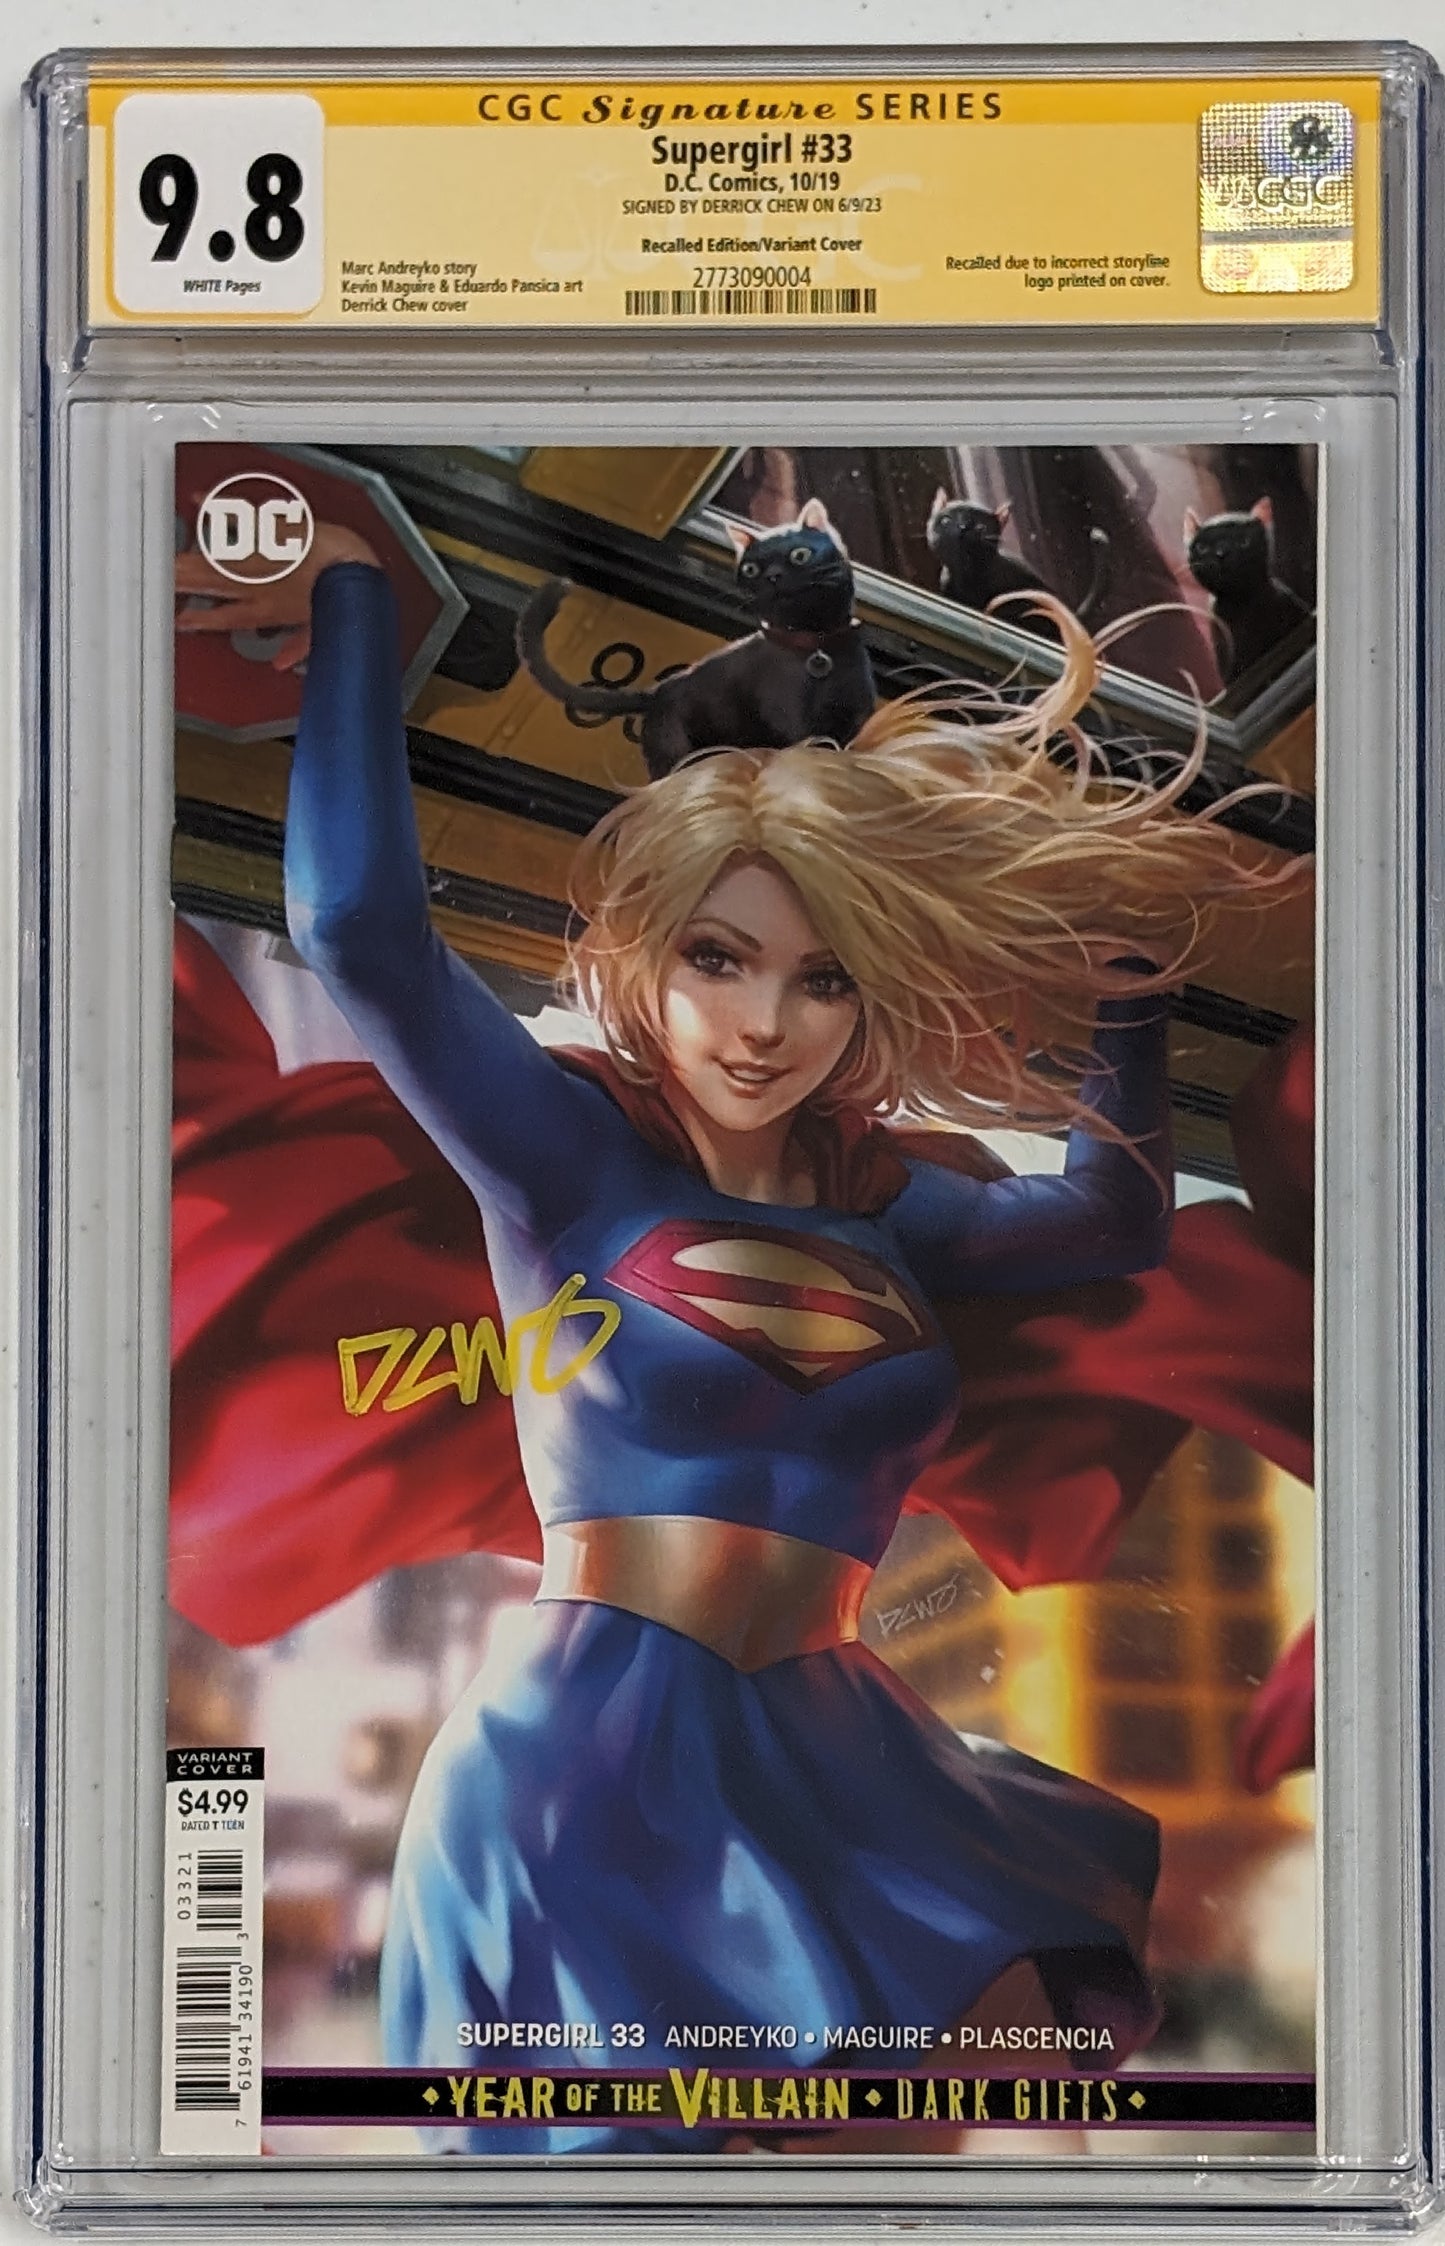 Supergirl #33 (2019) Recalled Cover - CGC SS 9.8 - signed by Derrick Chew